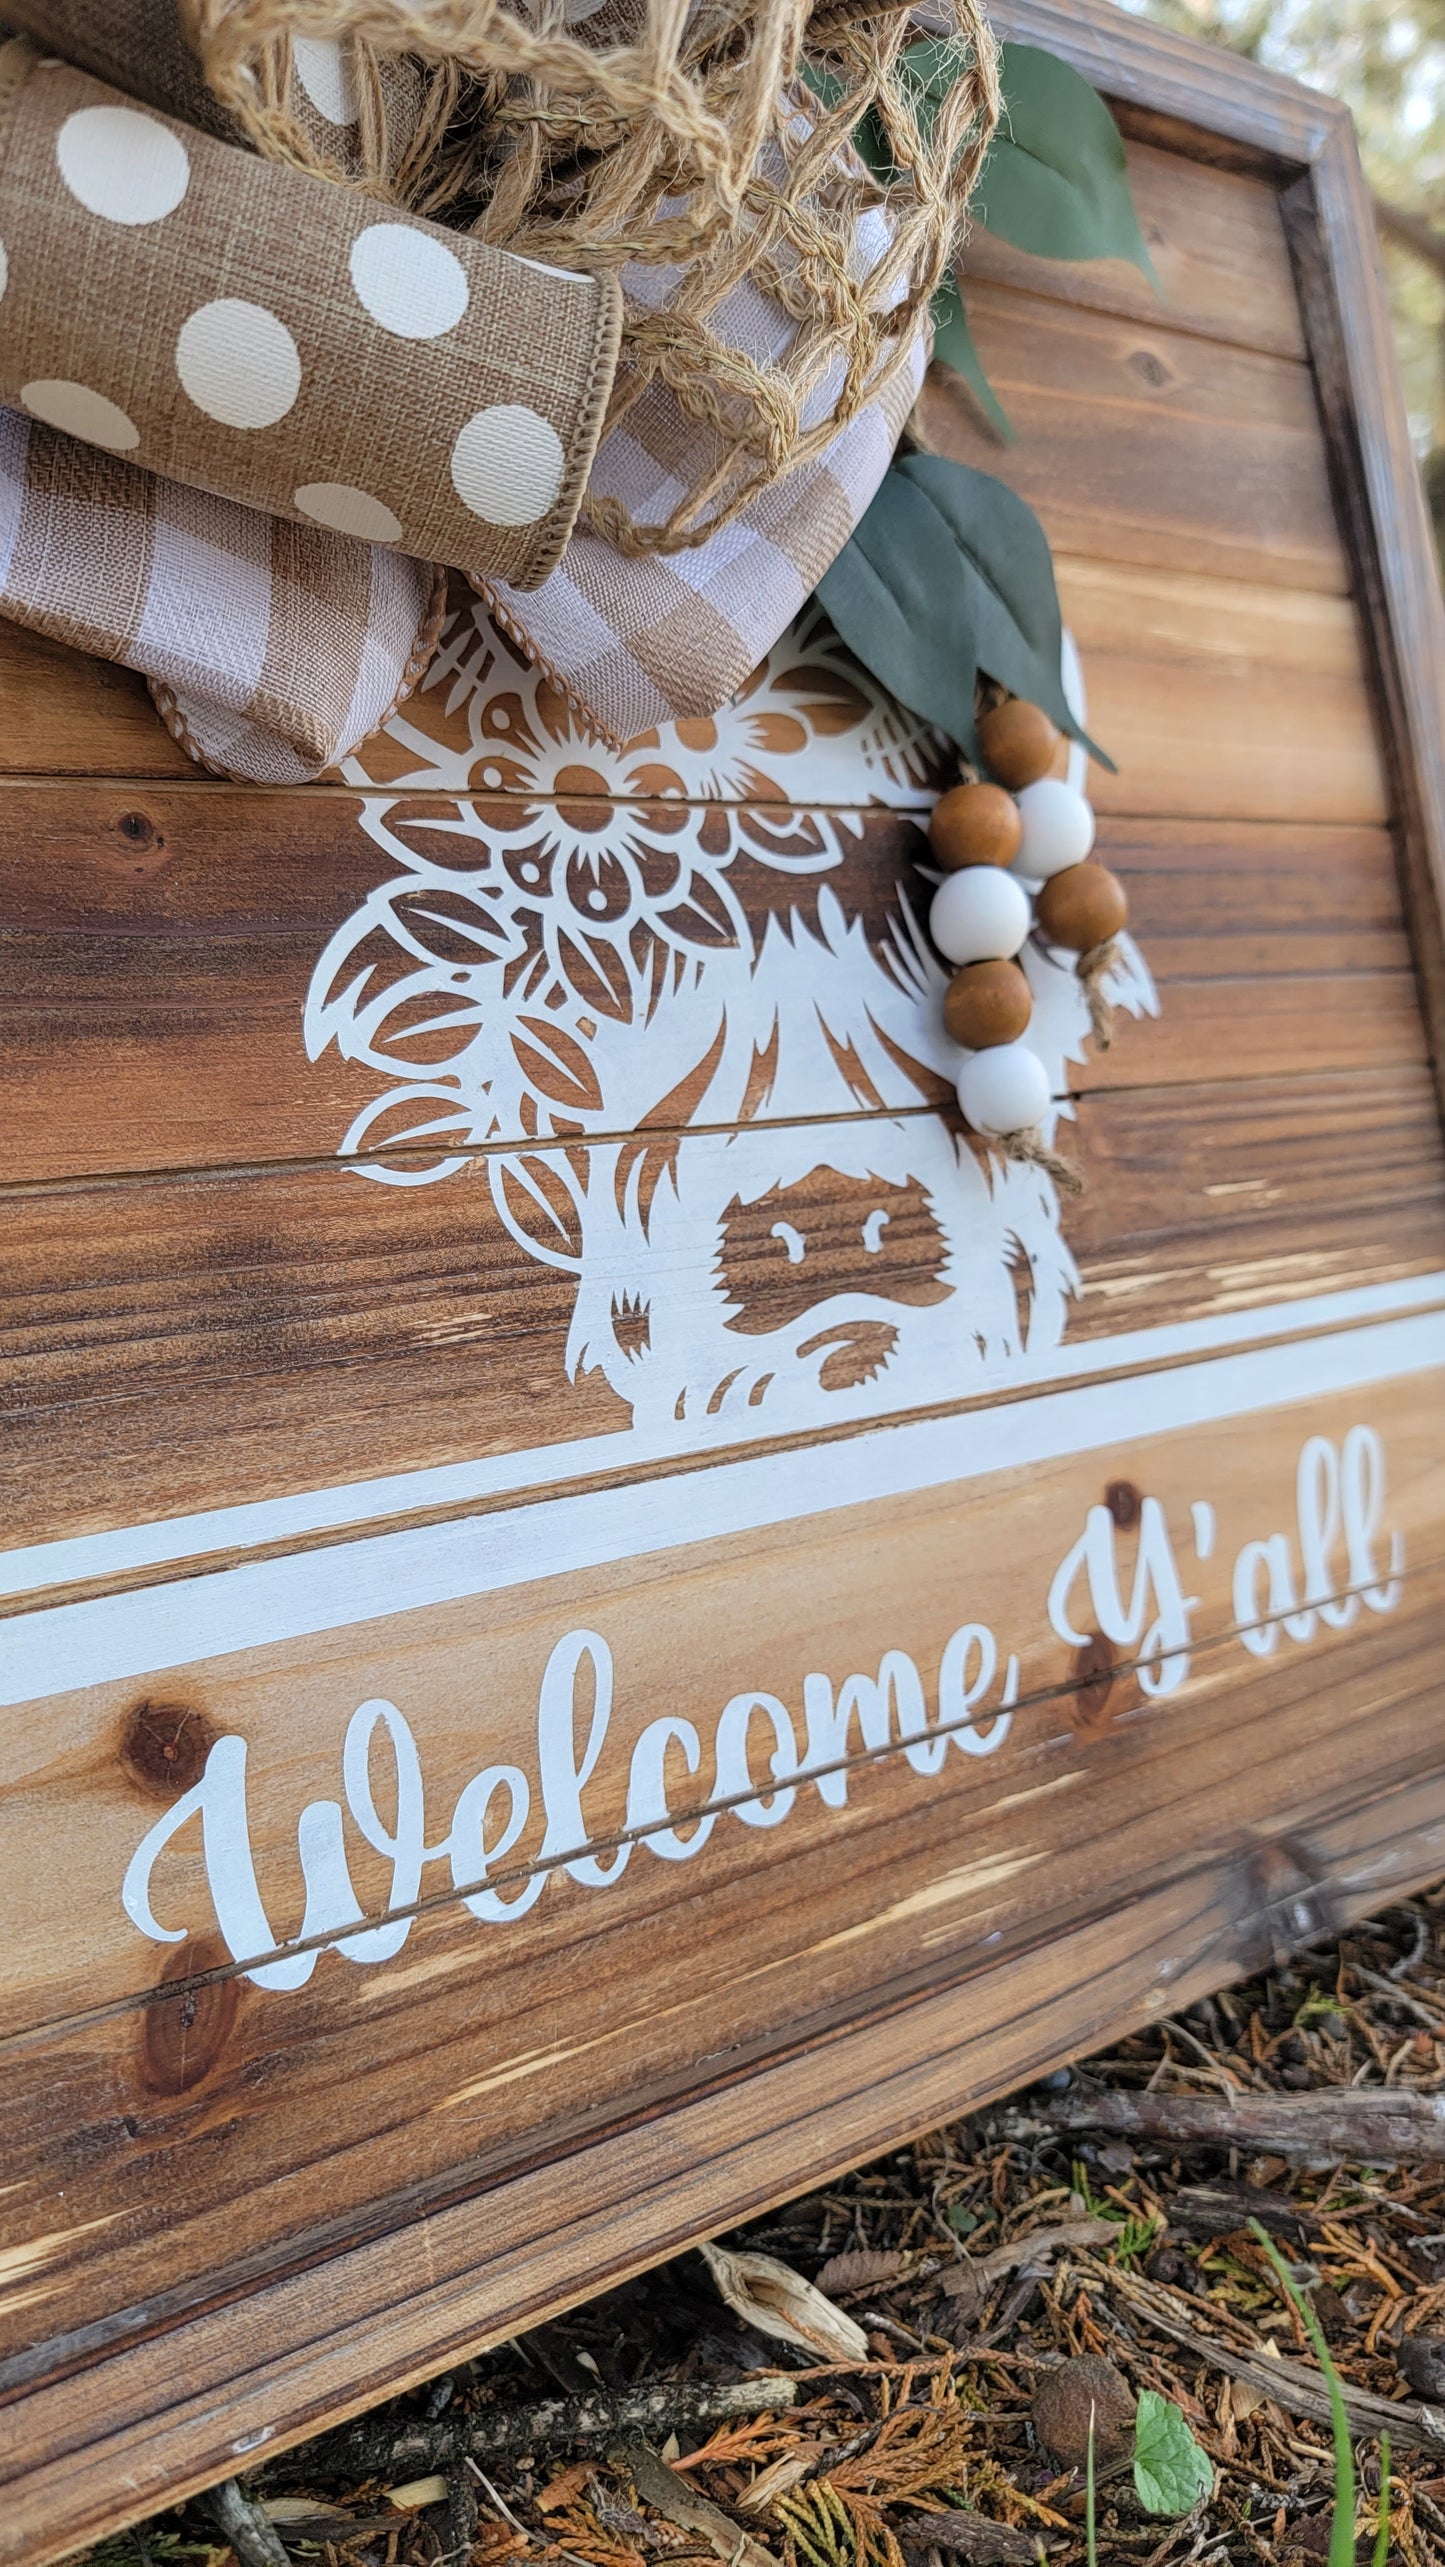 Highland Cow Welcome Sign